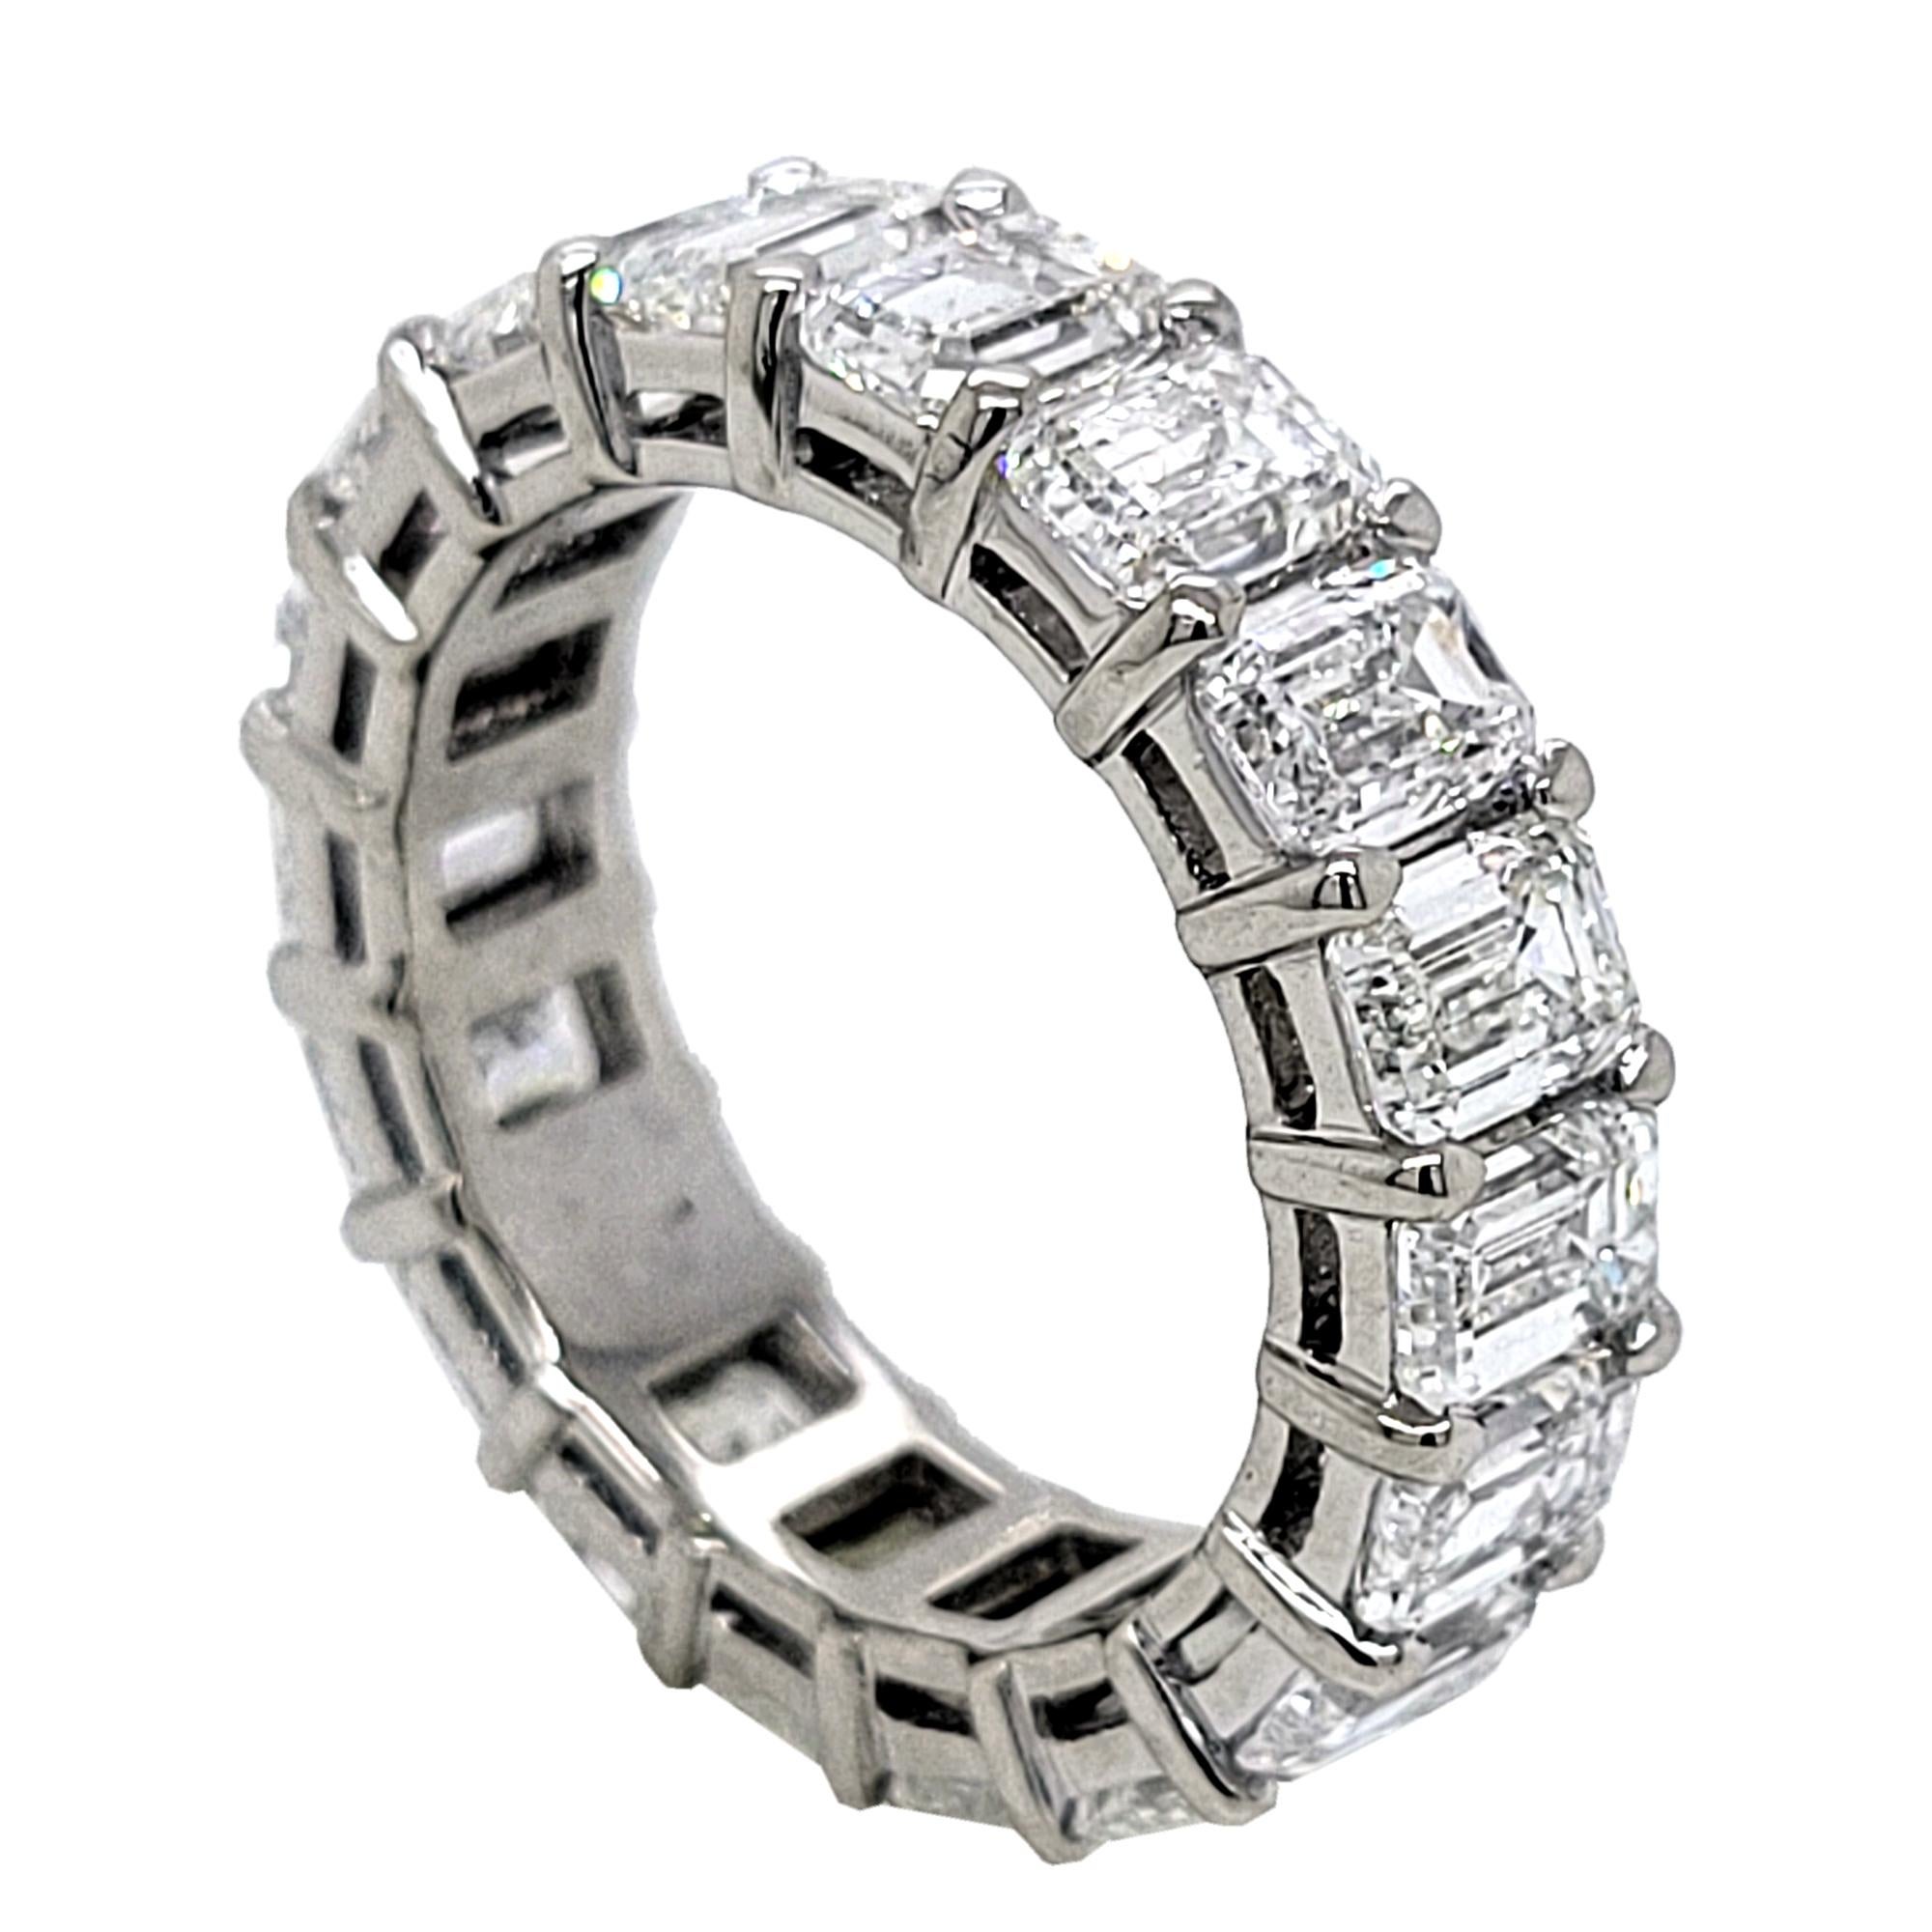 GIA Certified 7.24 Carat '0.40 Cts' Emerald Cut Platinum Diamond Eternity Ring For Sale 1